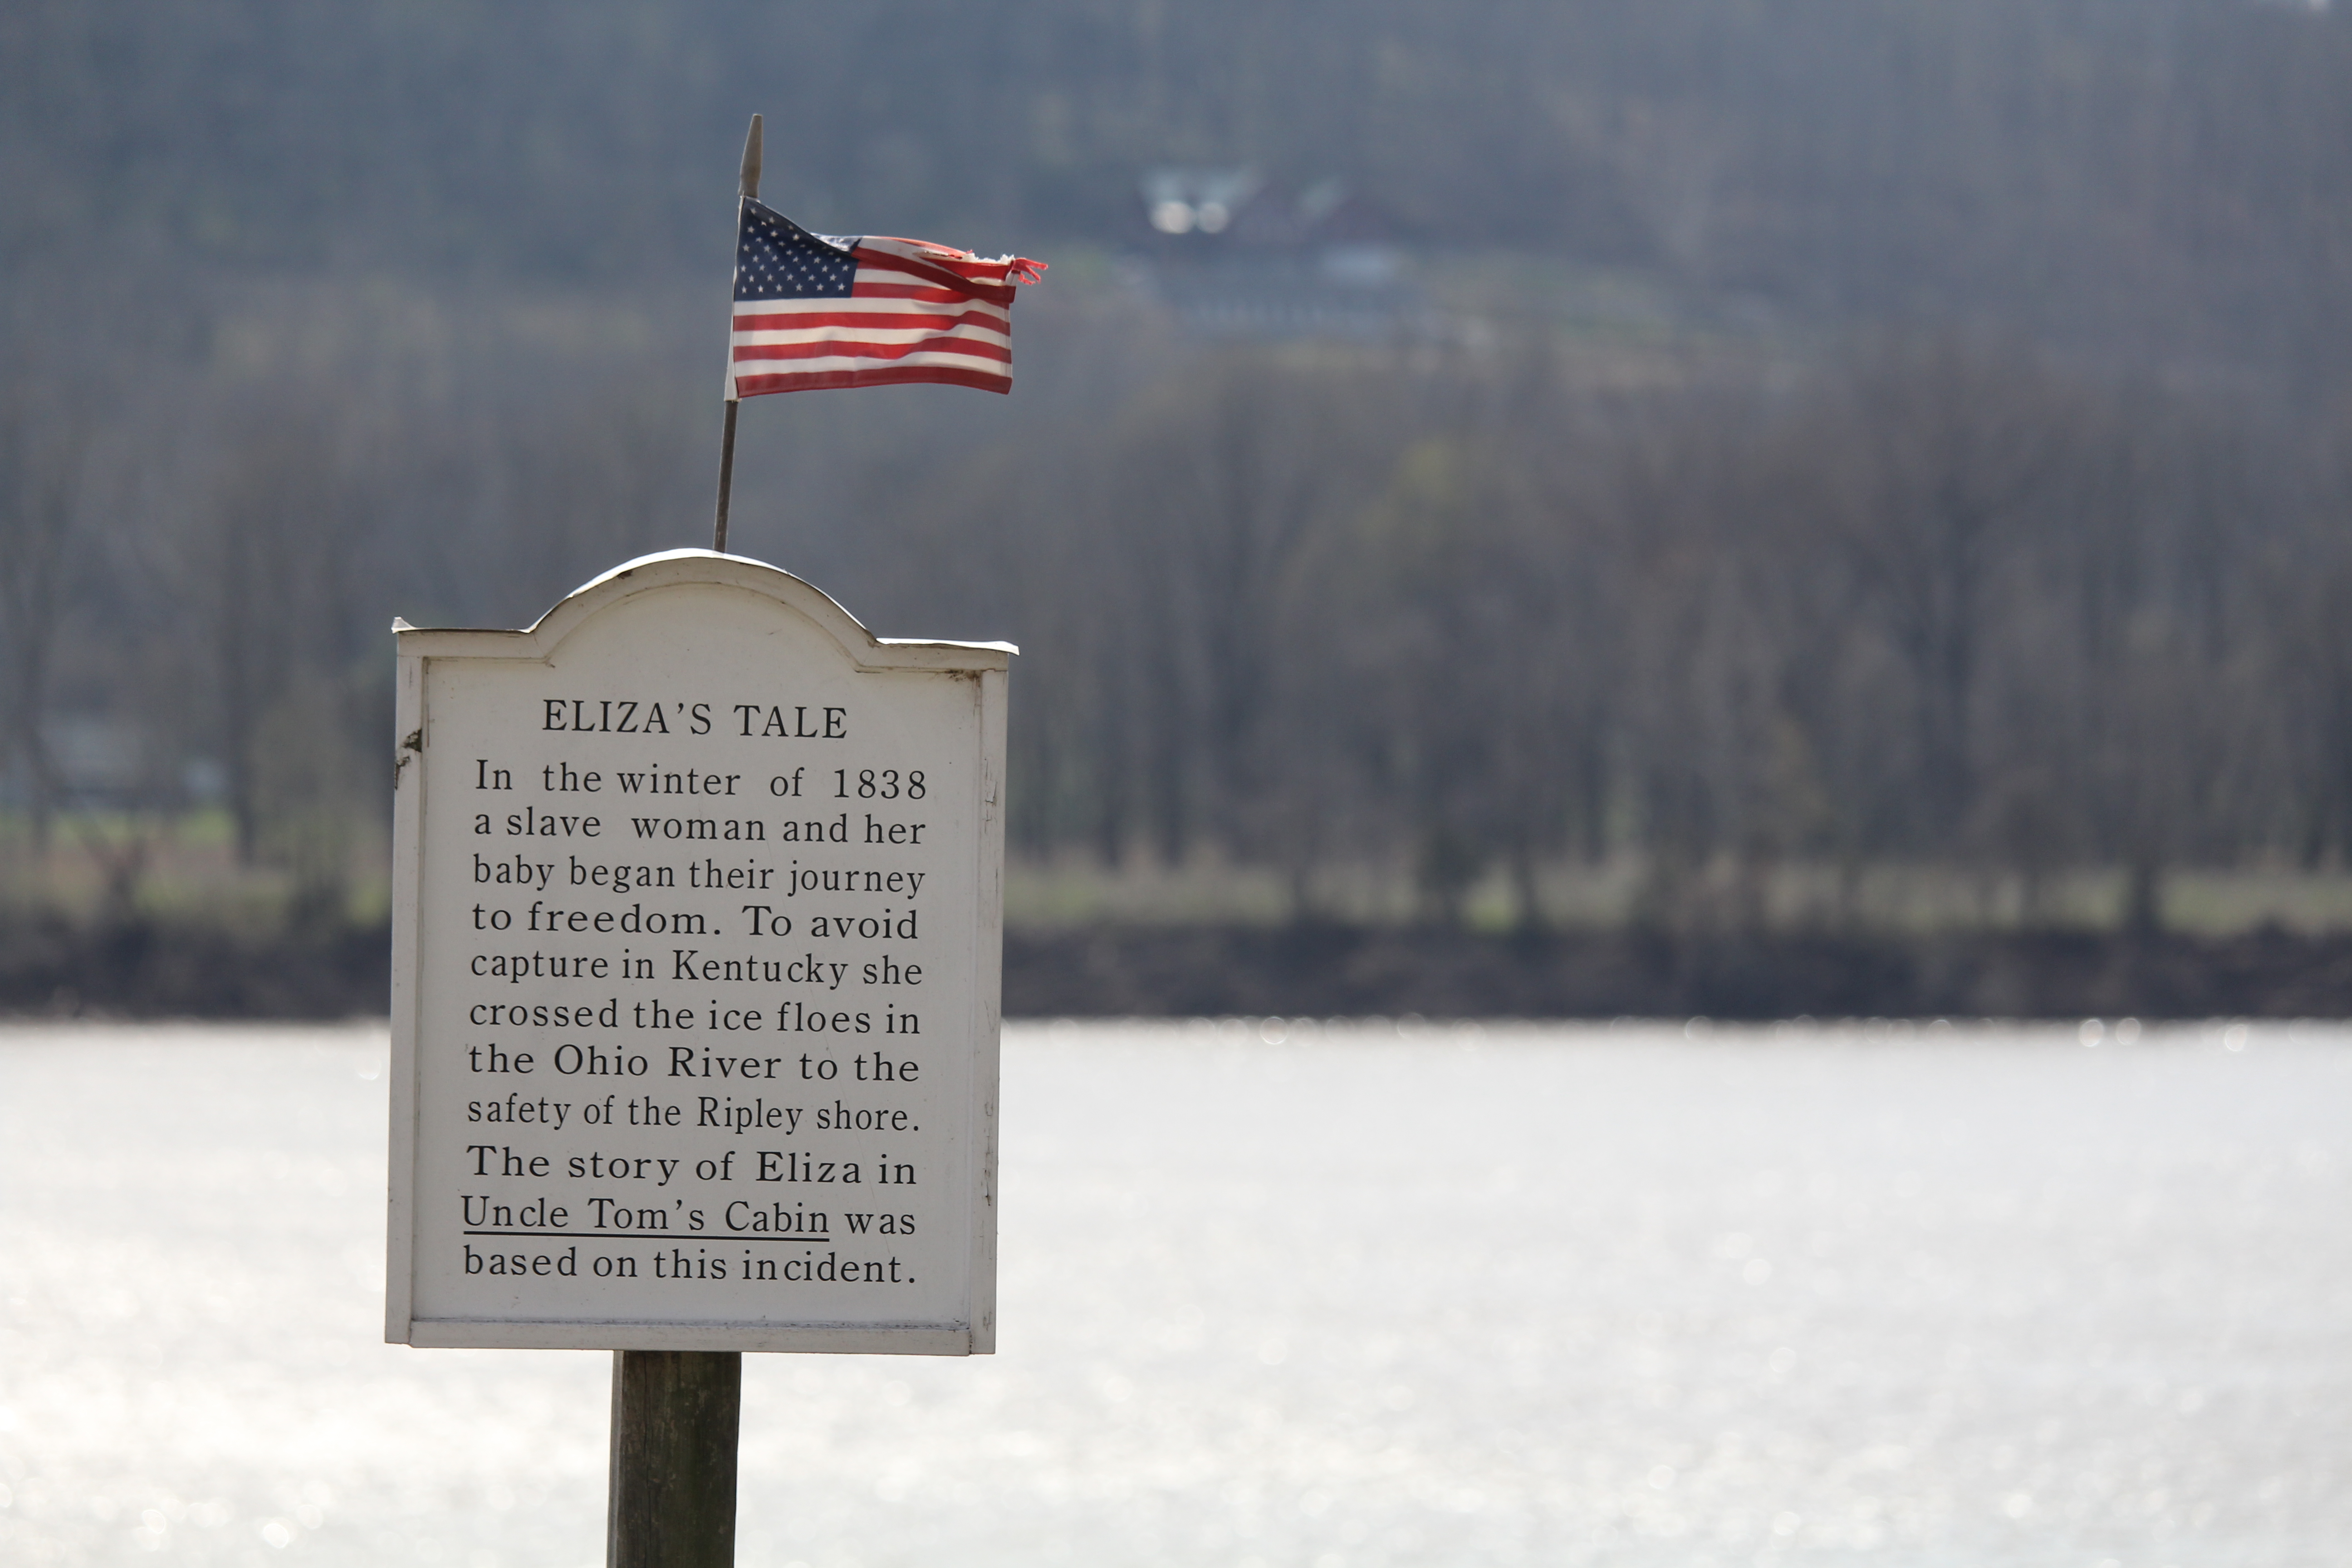 Marker along the Ohio River chronicling the story of Eliza Harris that inspired Harriet Beecher Stowe’s “Uncle Tom’s Cabin"